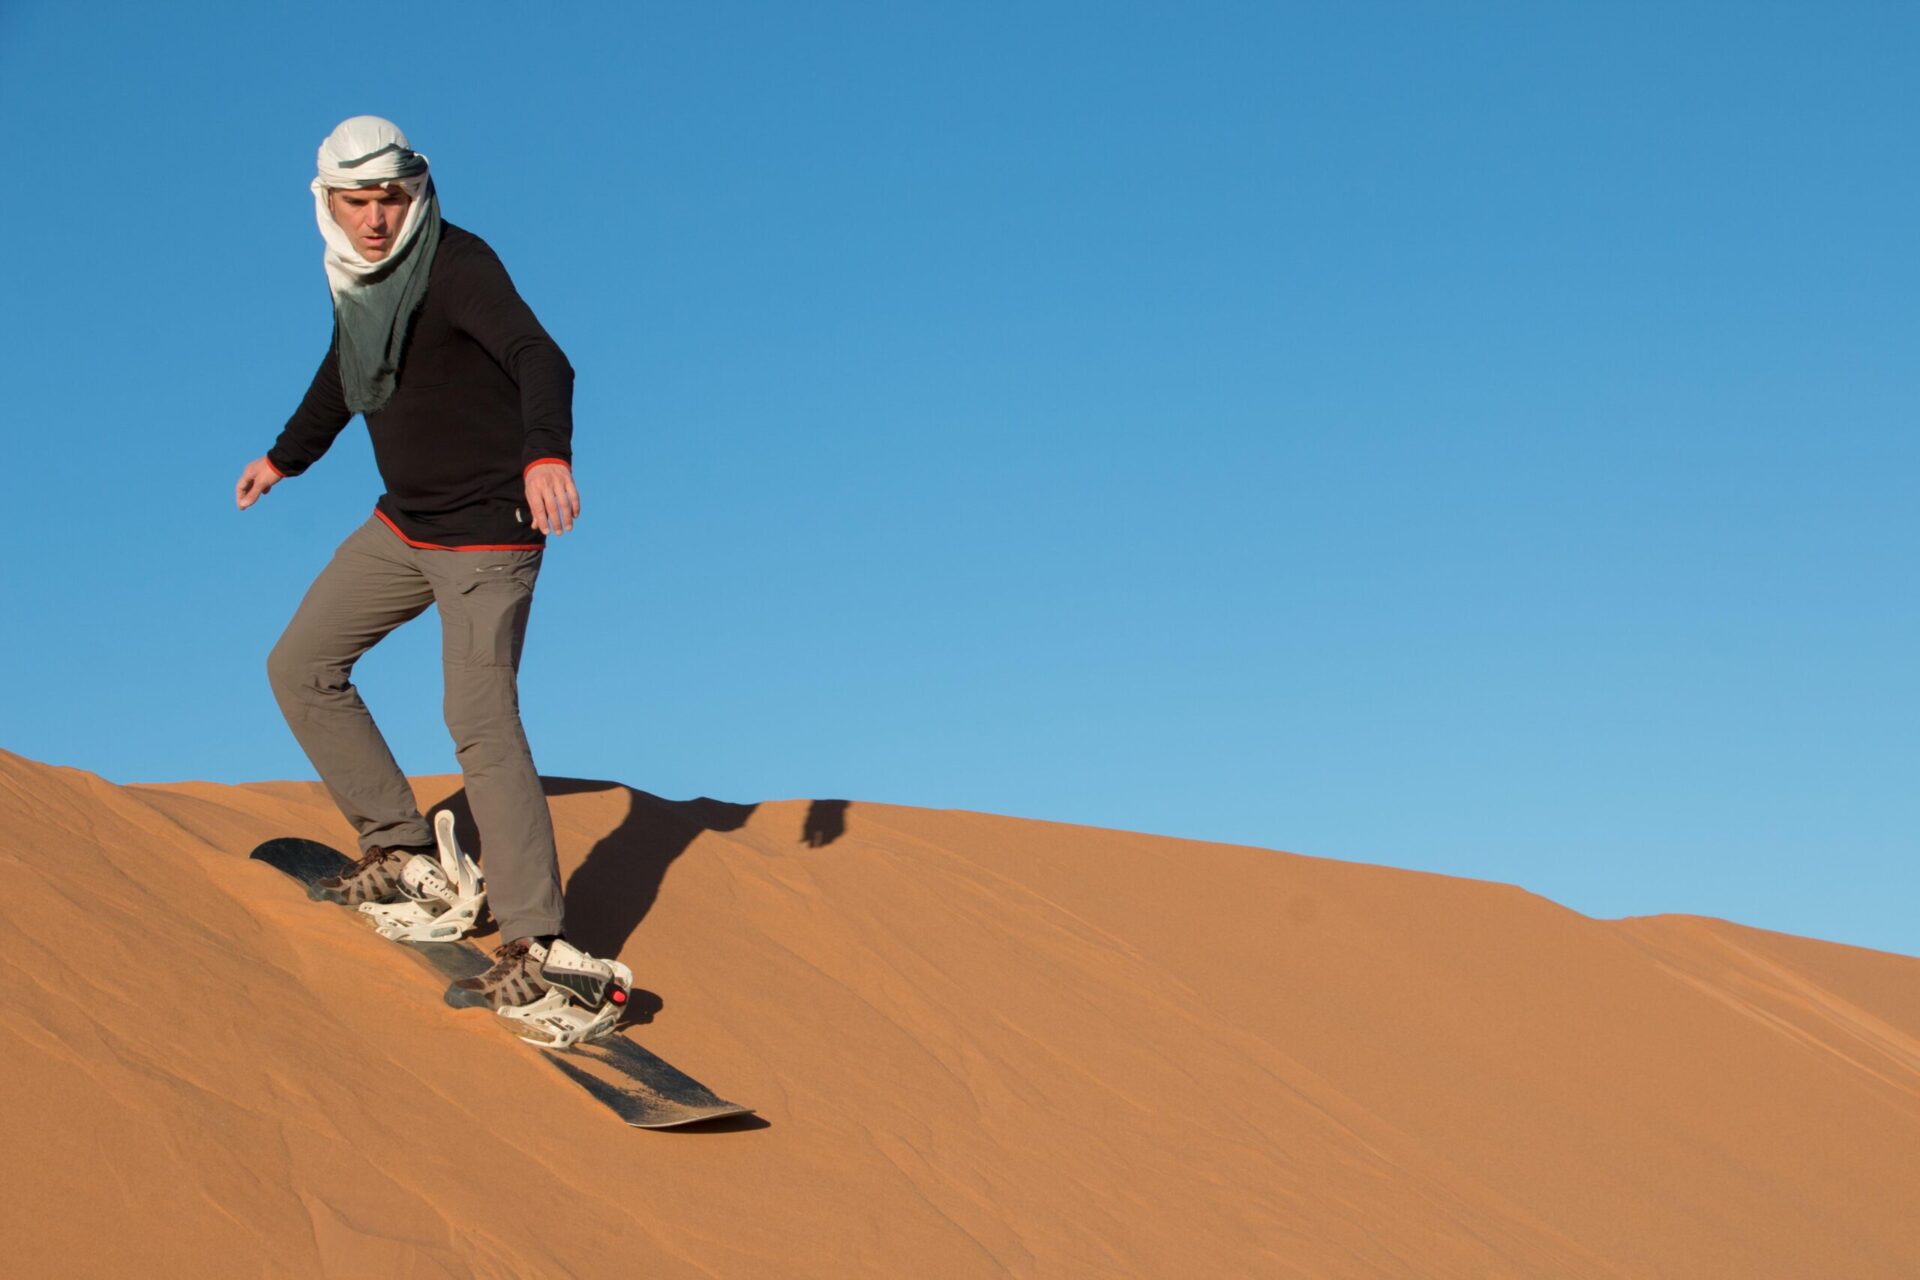 A man with a headscarf practicing sandboarding in the desert dunes of Erg Chebbi